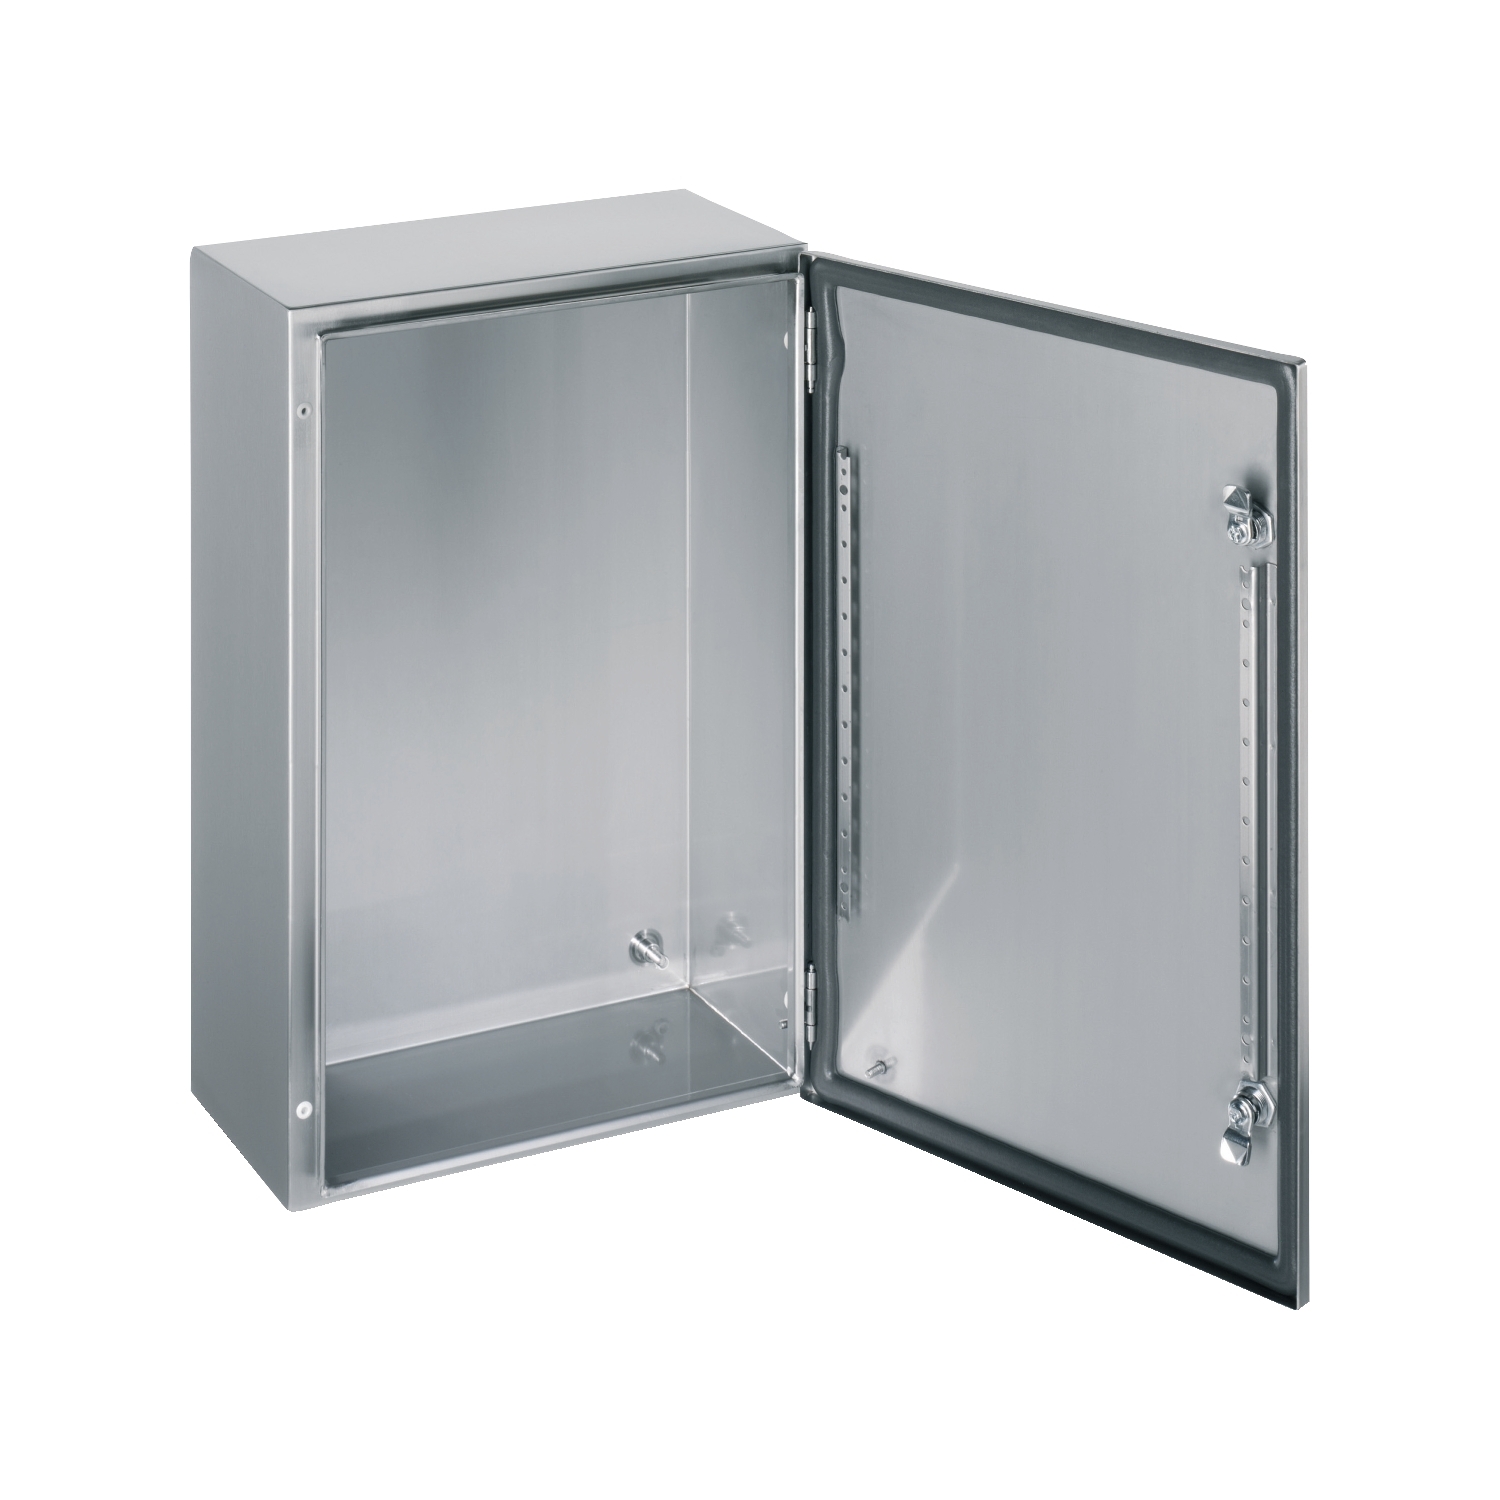 Wall mounted enclosure, Spacial S3X, stainless steel 316L, plain door, 600x400x200mm, IP66